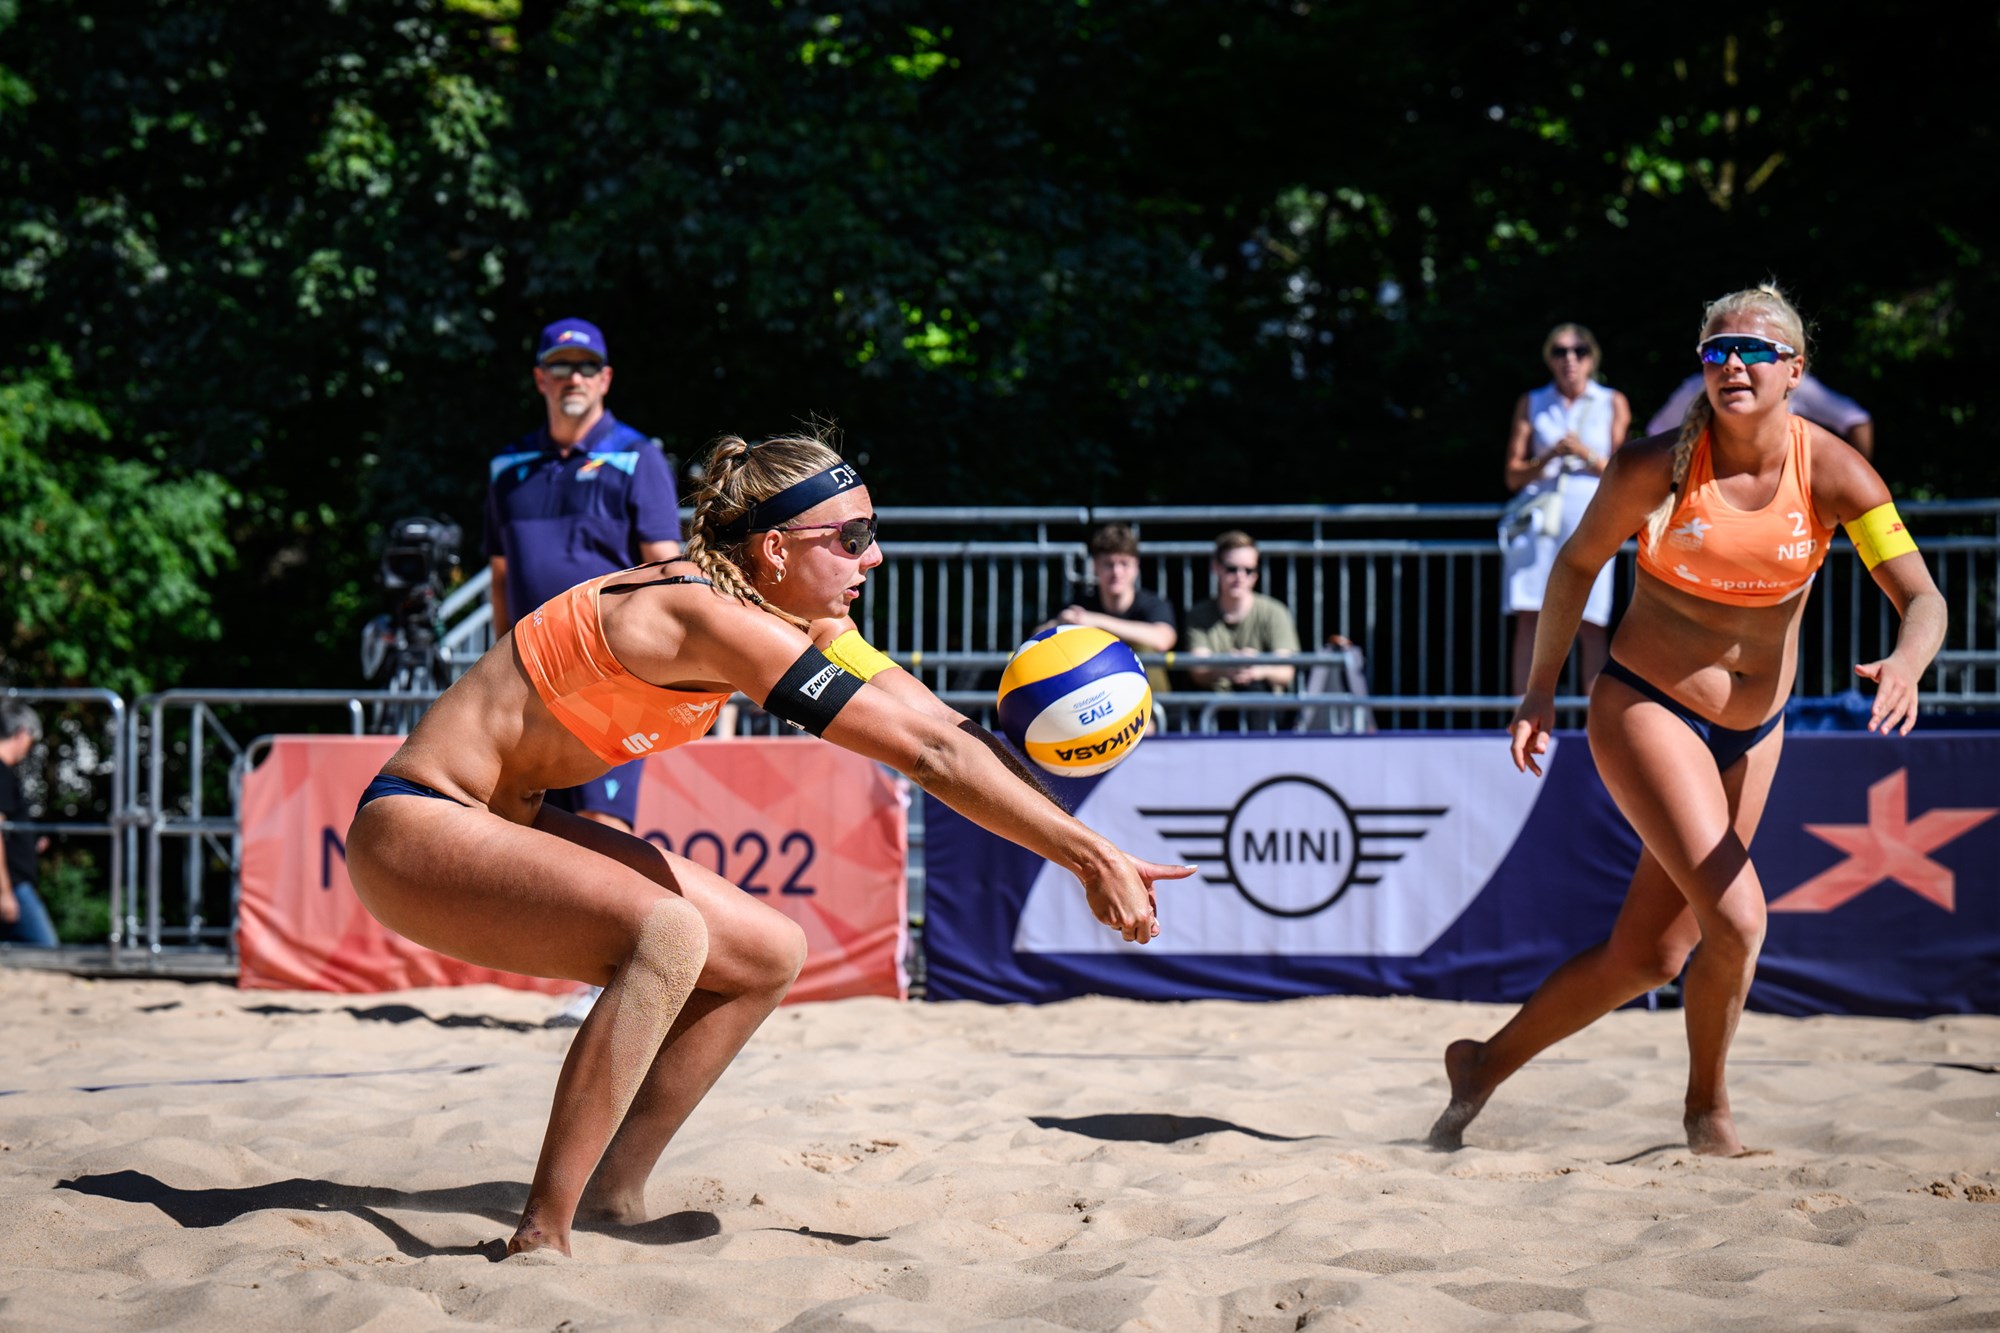 Schoon and Stam to lead the Netherlands in Nations Cup Pool C CEV